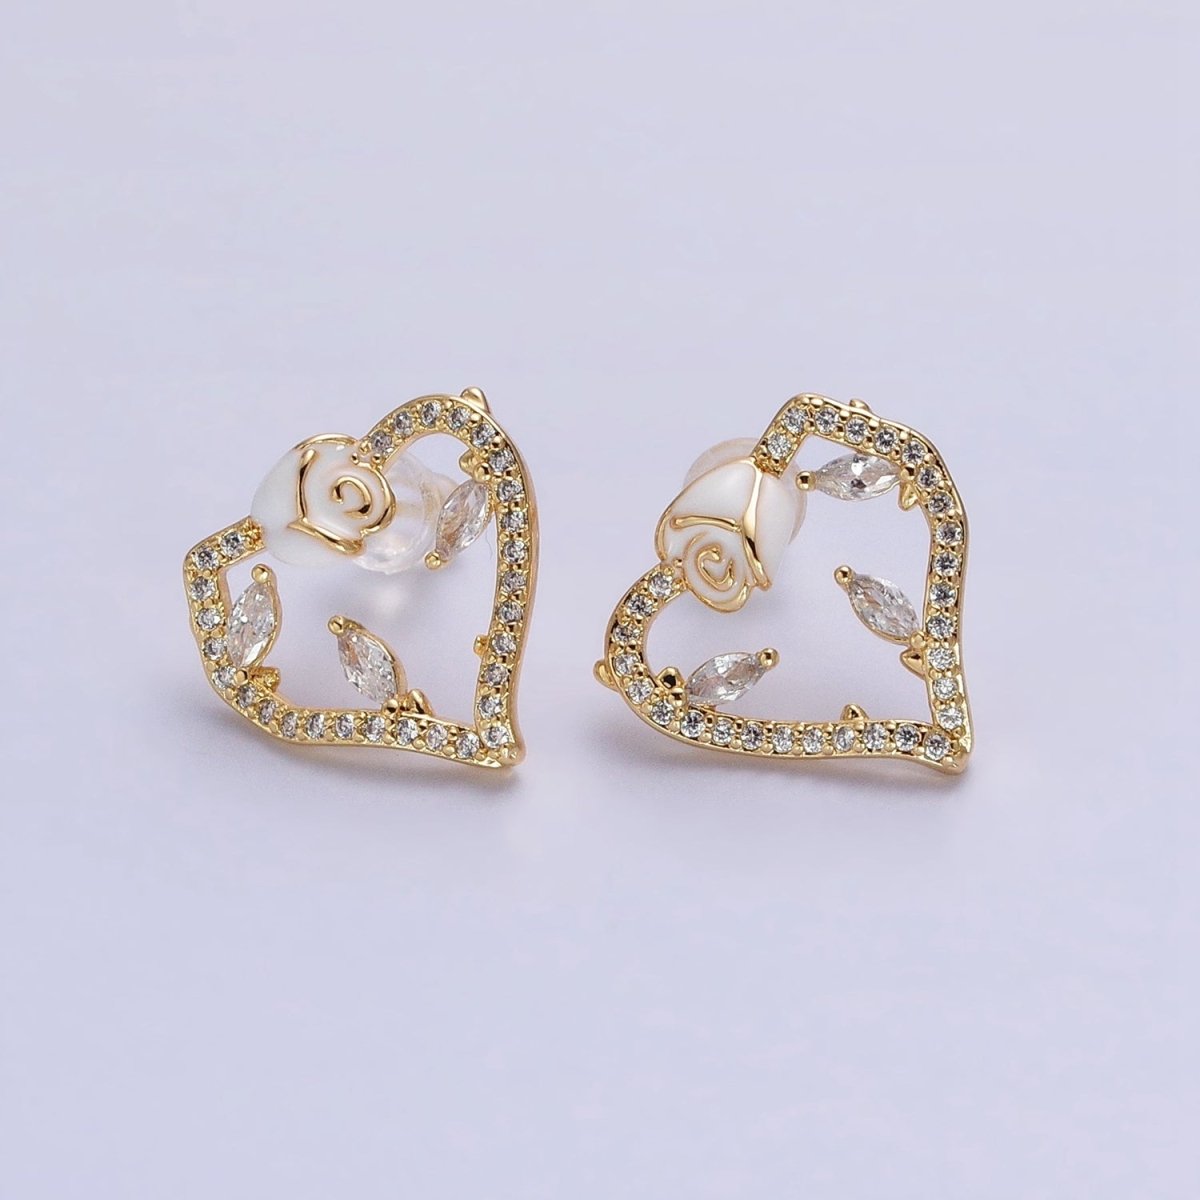 Gold, Silver Micro Paved CZ Geometric Heart White Rose Flower Stud Earrings | AB599 AB600 - DLUXCA